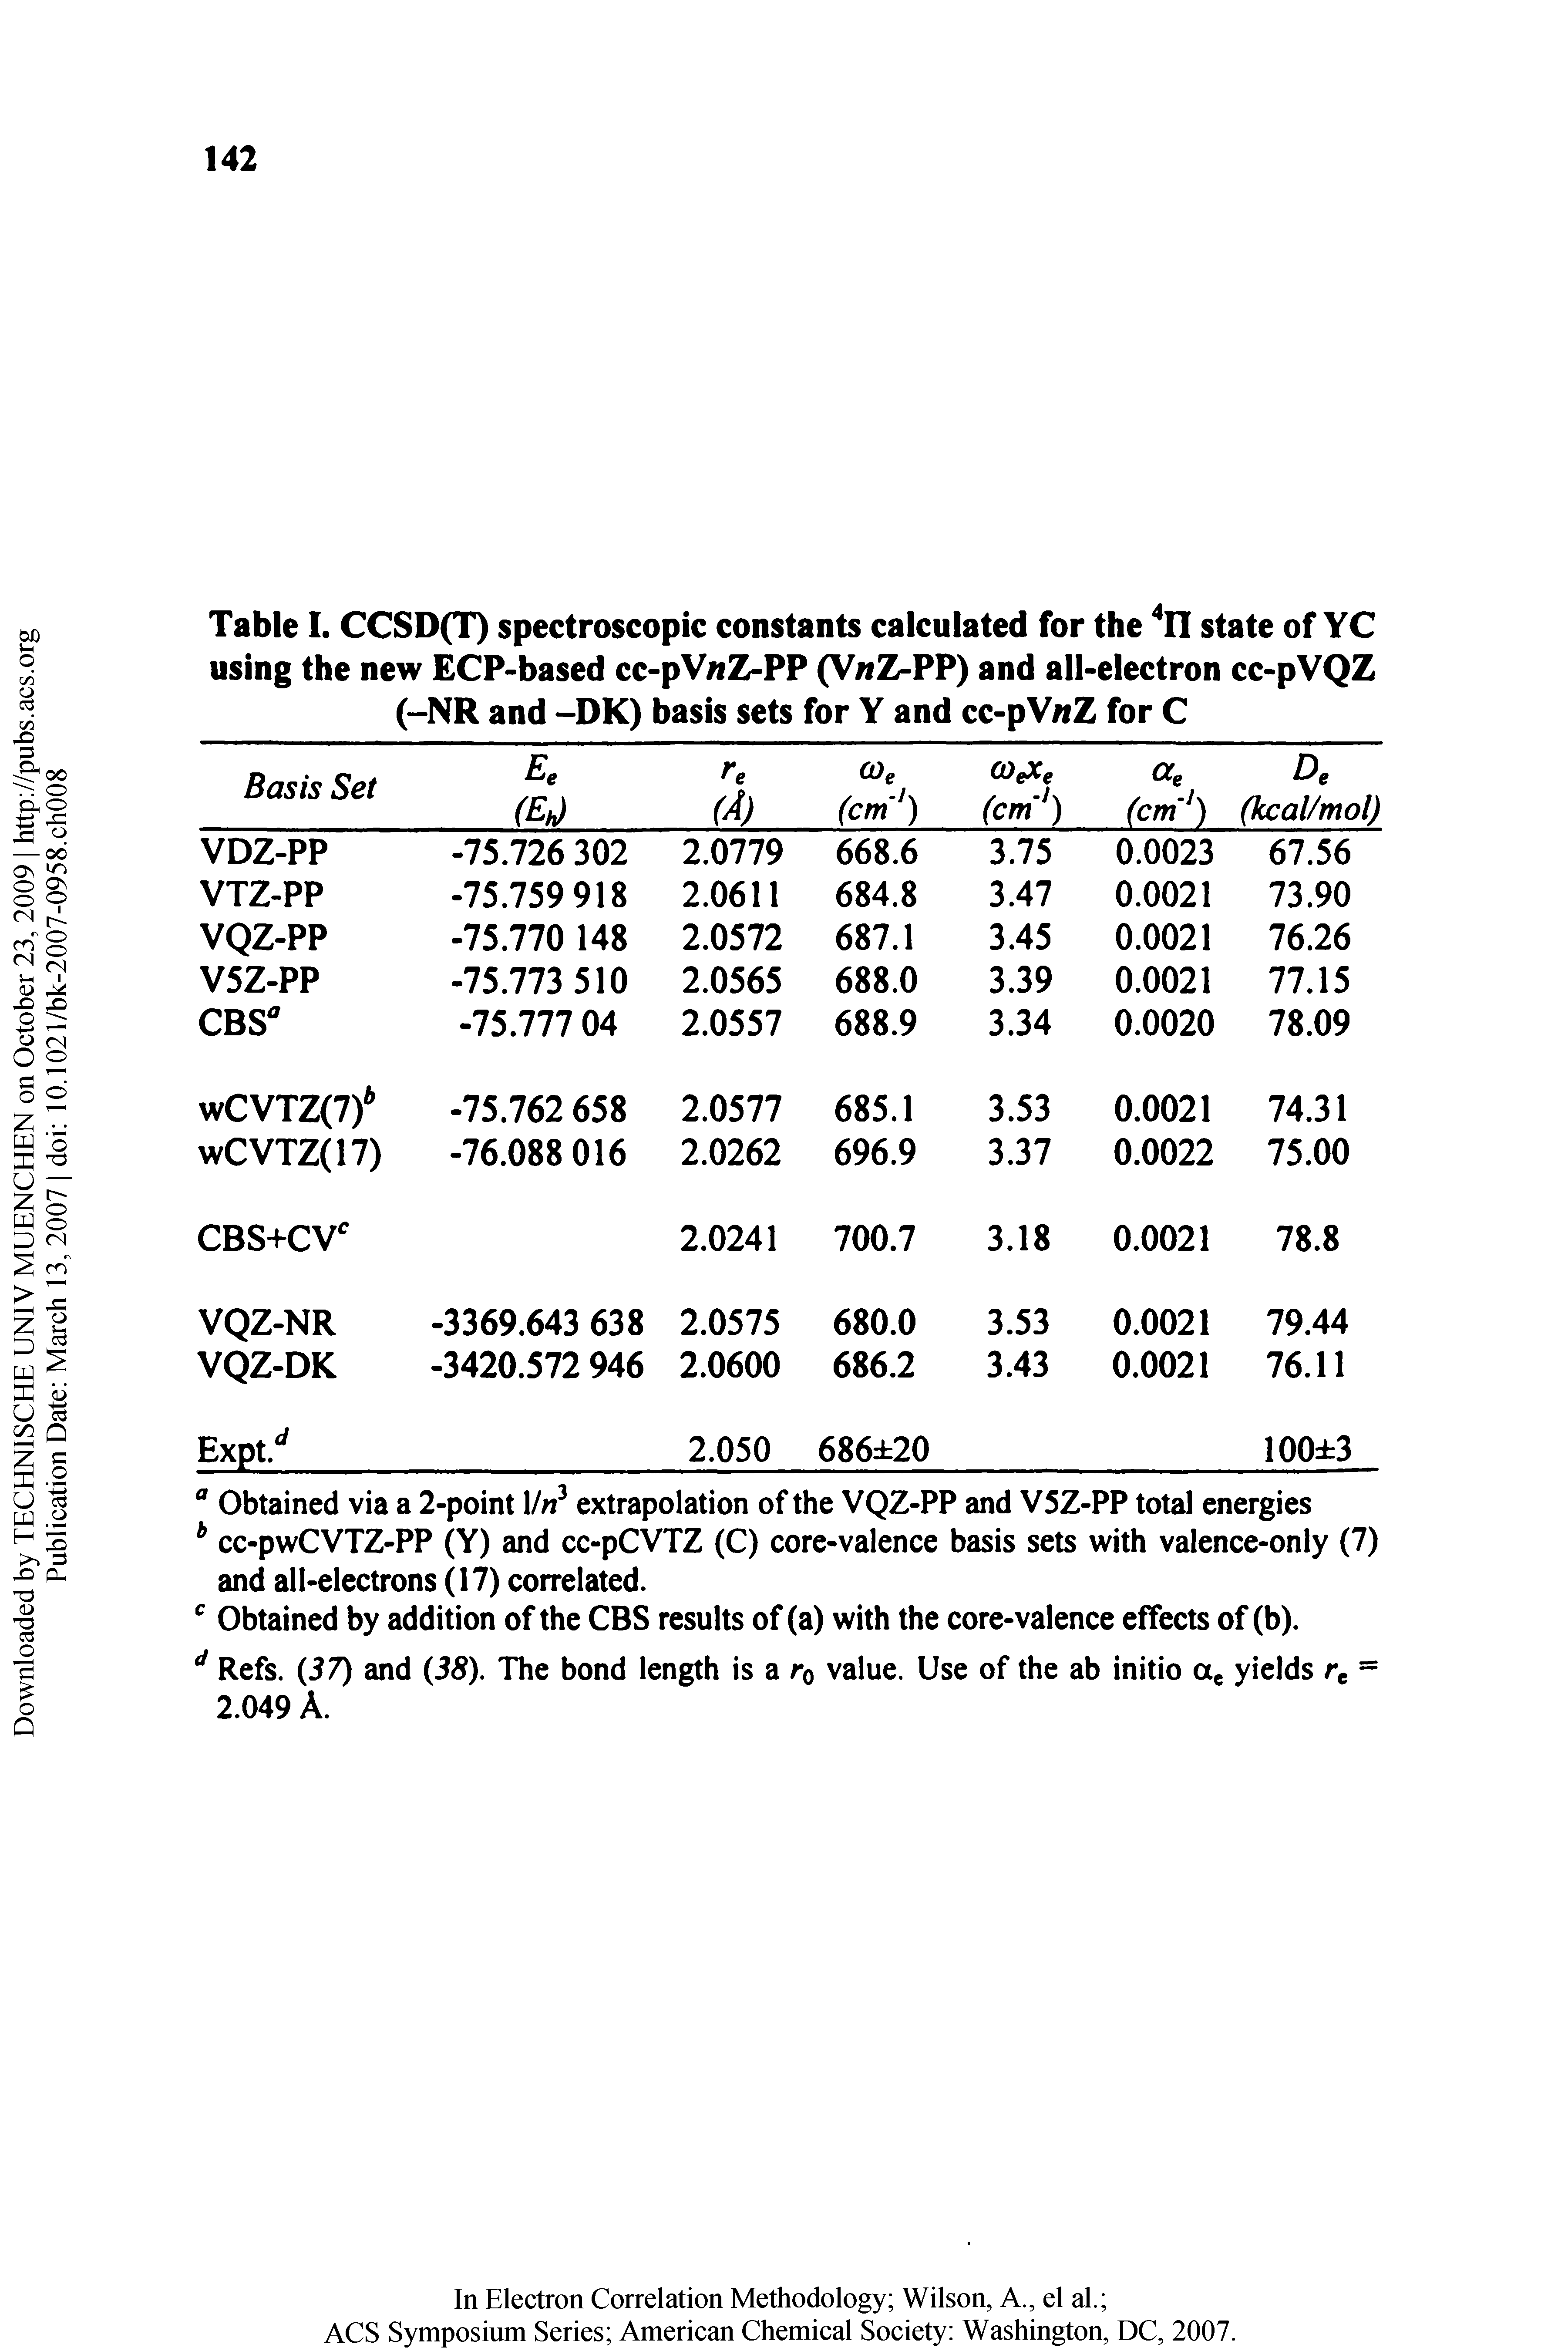 Table I. CCSD(T) spectroscopic constants calculated for the 11 state of YC using the new ECP-based cc-pVnZ-PP (V/tZ-PP) and all-electron cc- pVQZ (-NR and -DK) basis sets for Y and cc-pV/fZ for C...